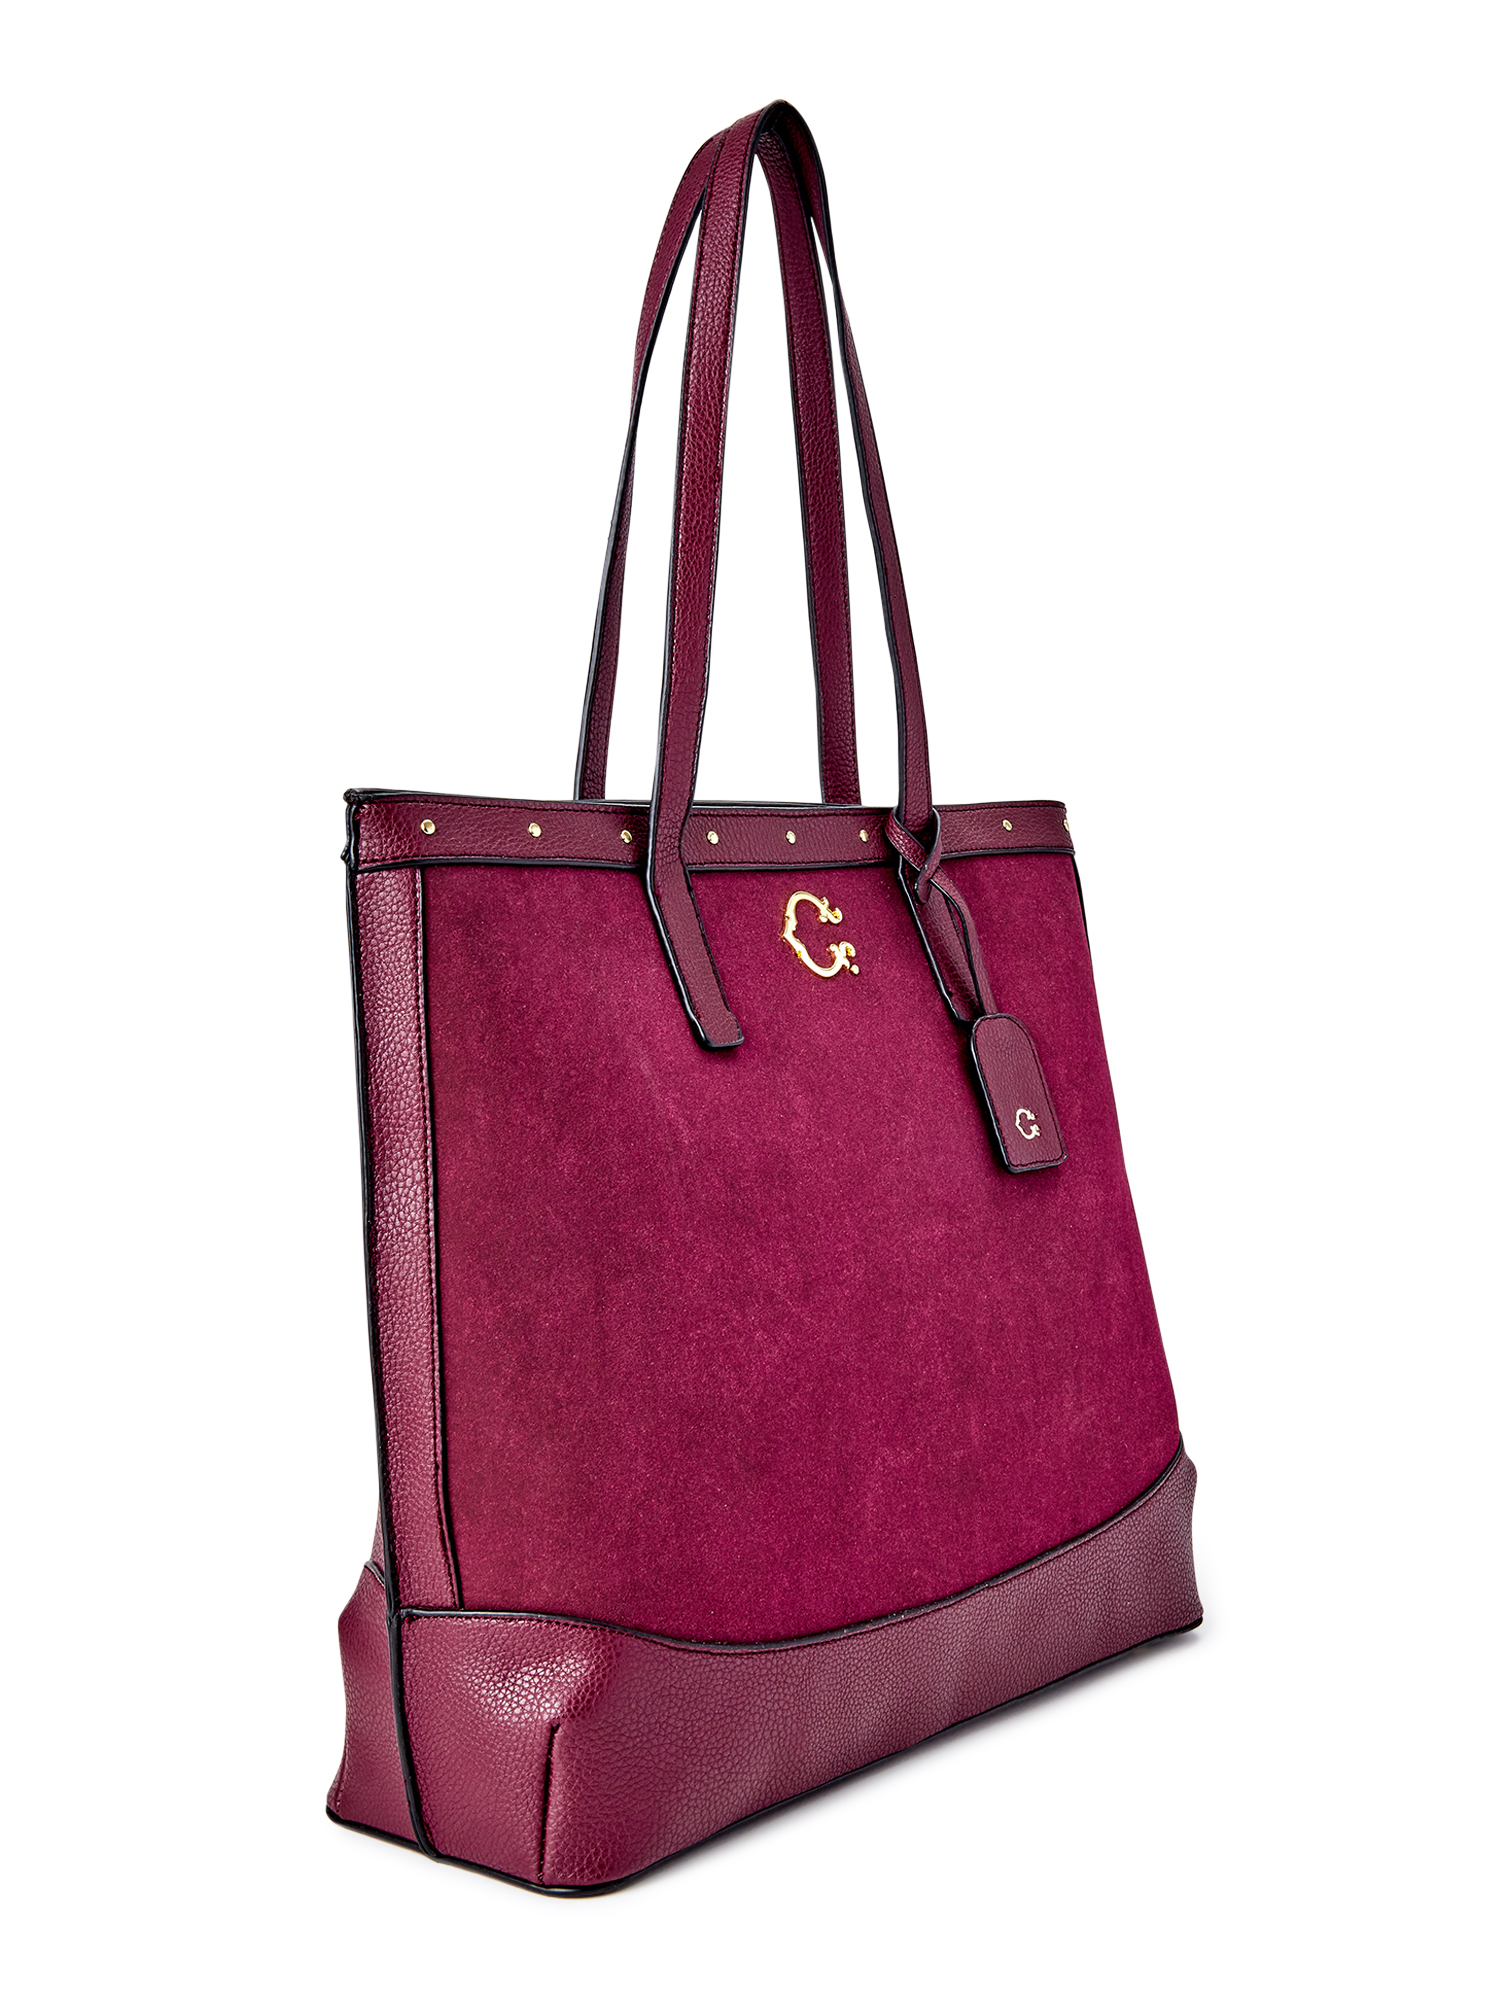 C. Wonder Women's Emma Faux Suede Studded Tote Bag Wine - image 4 of 5